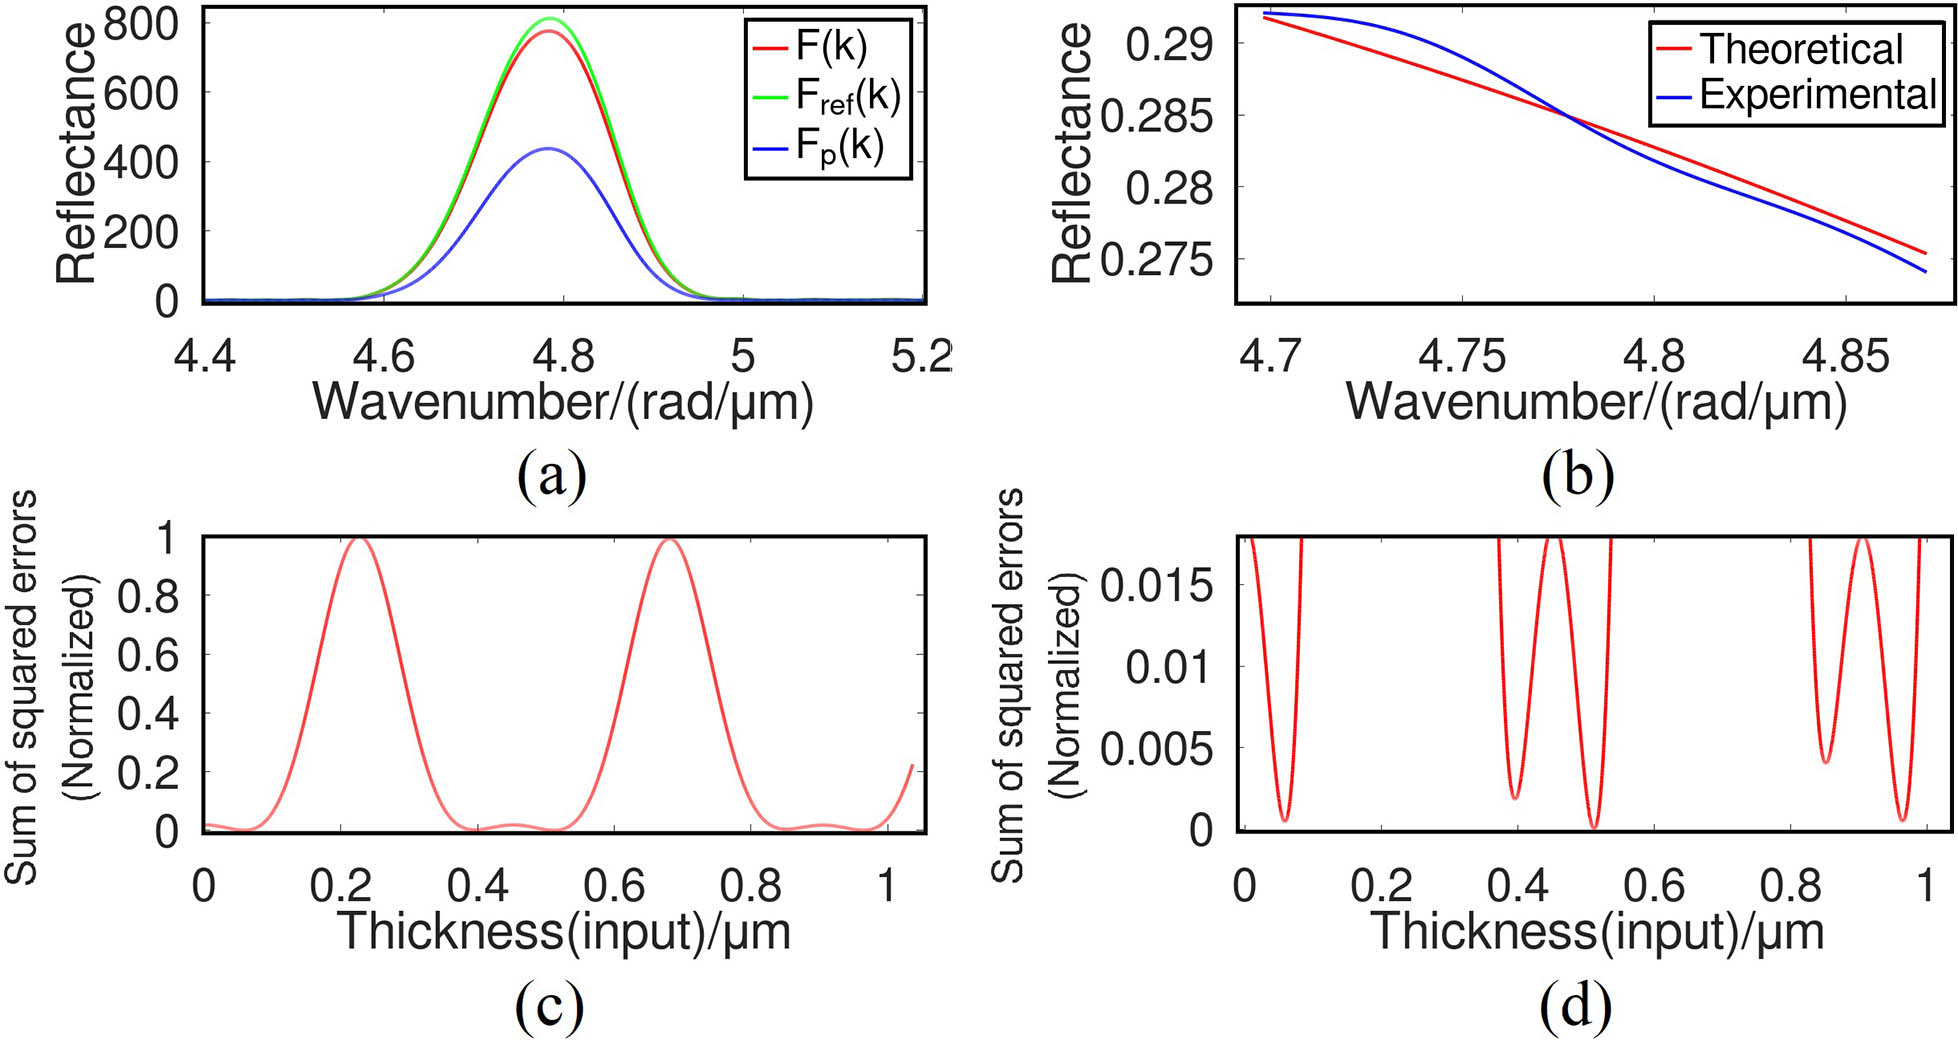 Experimental results for a single measurement of 500 nm SiO2 coating. (a) Reflectance spectrum F(k), Fref(k), and Fp(k). (b) Comparison of measured reflectance R(k) and theoretical model. (c) Normalized sum of squared errors for reflectance fitting between the experimental result and theoretical model at different values of input thickness. (d) Detailed view of (c) showing the minimum sum of squared errors.